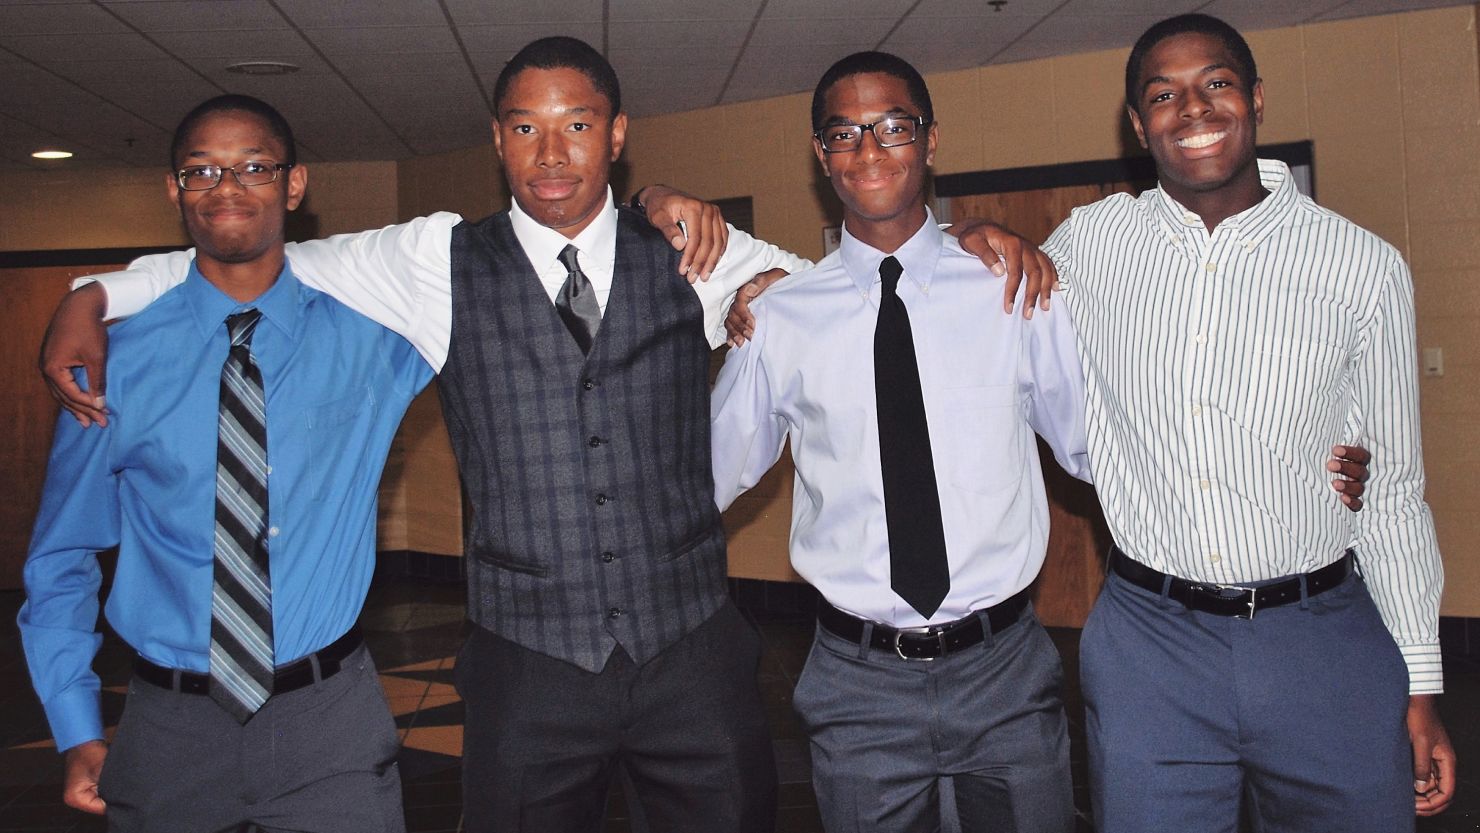 The Wade quadruplets, from left: Nigel, Zachary, Aaron, and Nick.